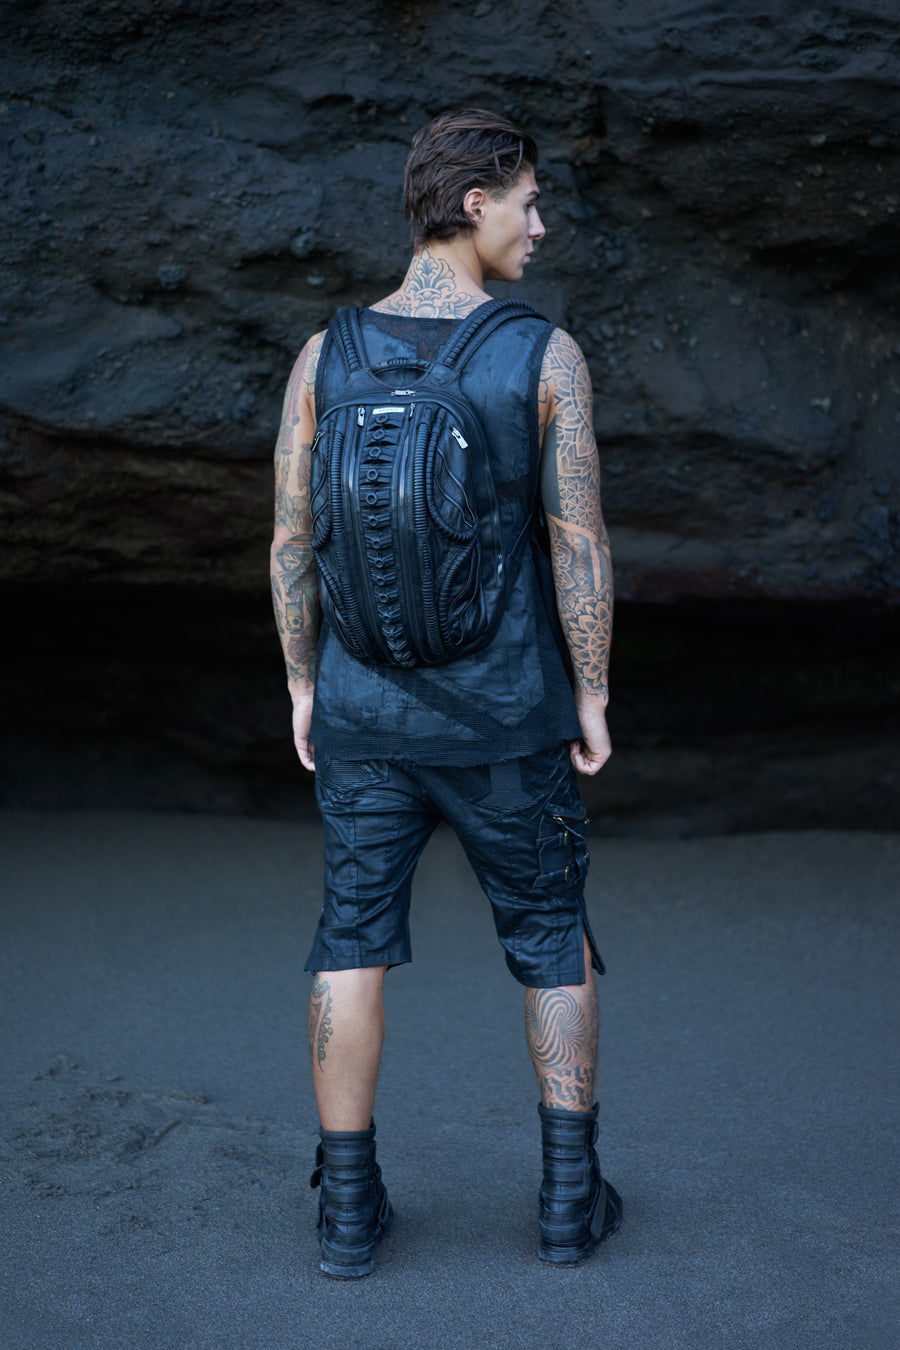 Men's post-apocalyptic apparel with biomorphic backpack, post-apocalyptic grunge top and cargo shorts